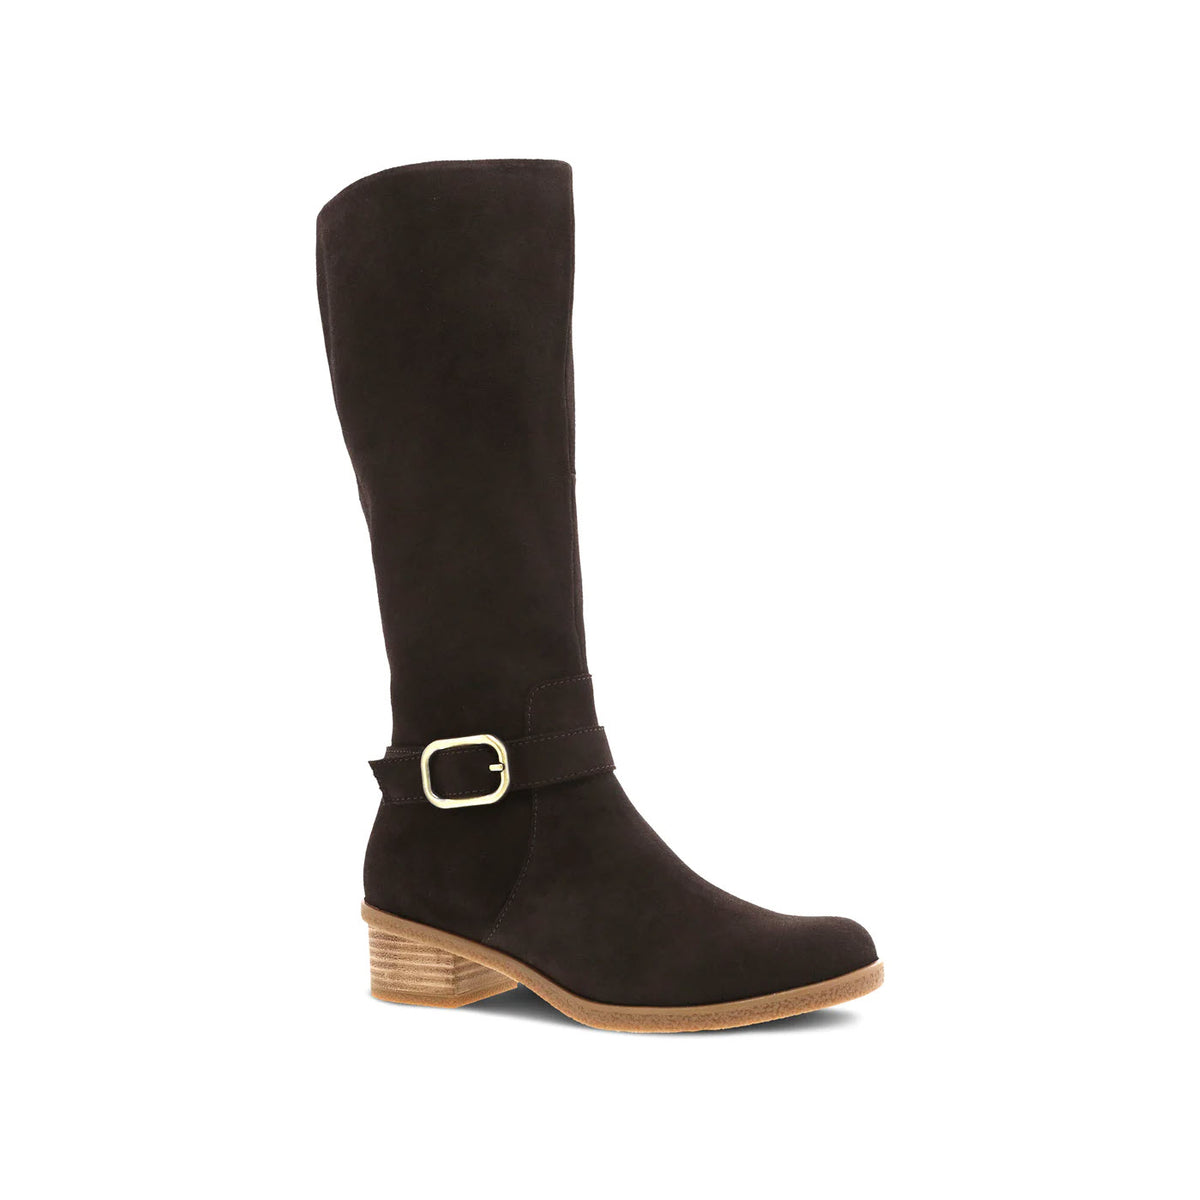 A black suede knee-high Dansko Dalinda boot with a small block heel and a decorative buckle on a white background.